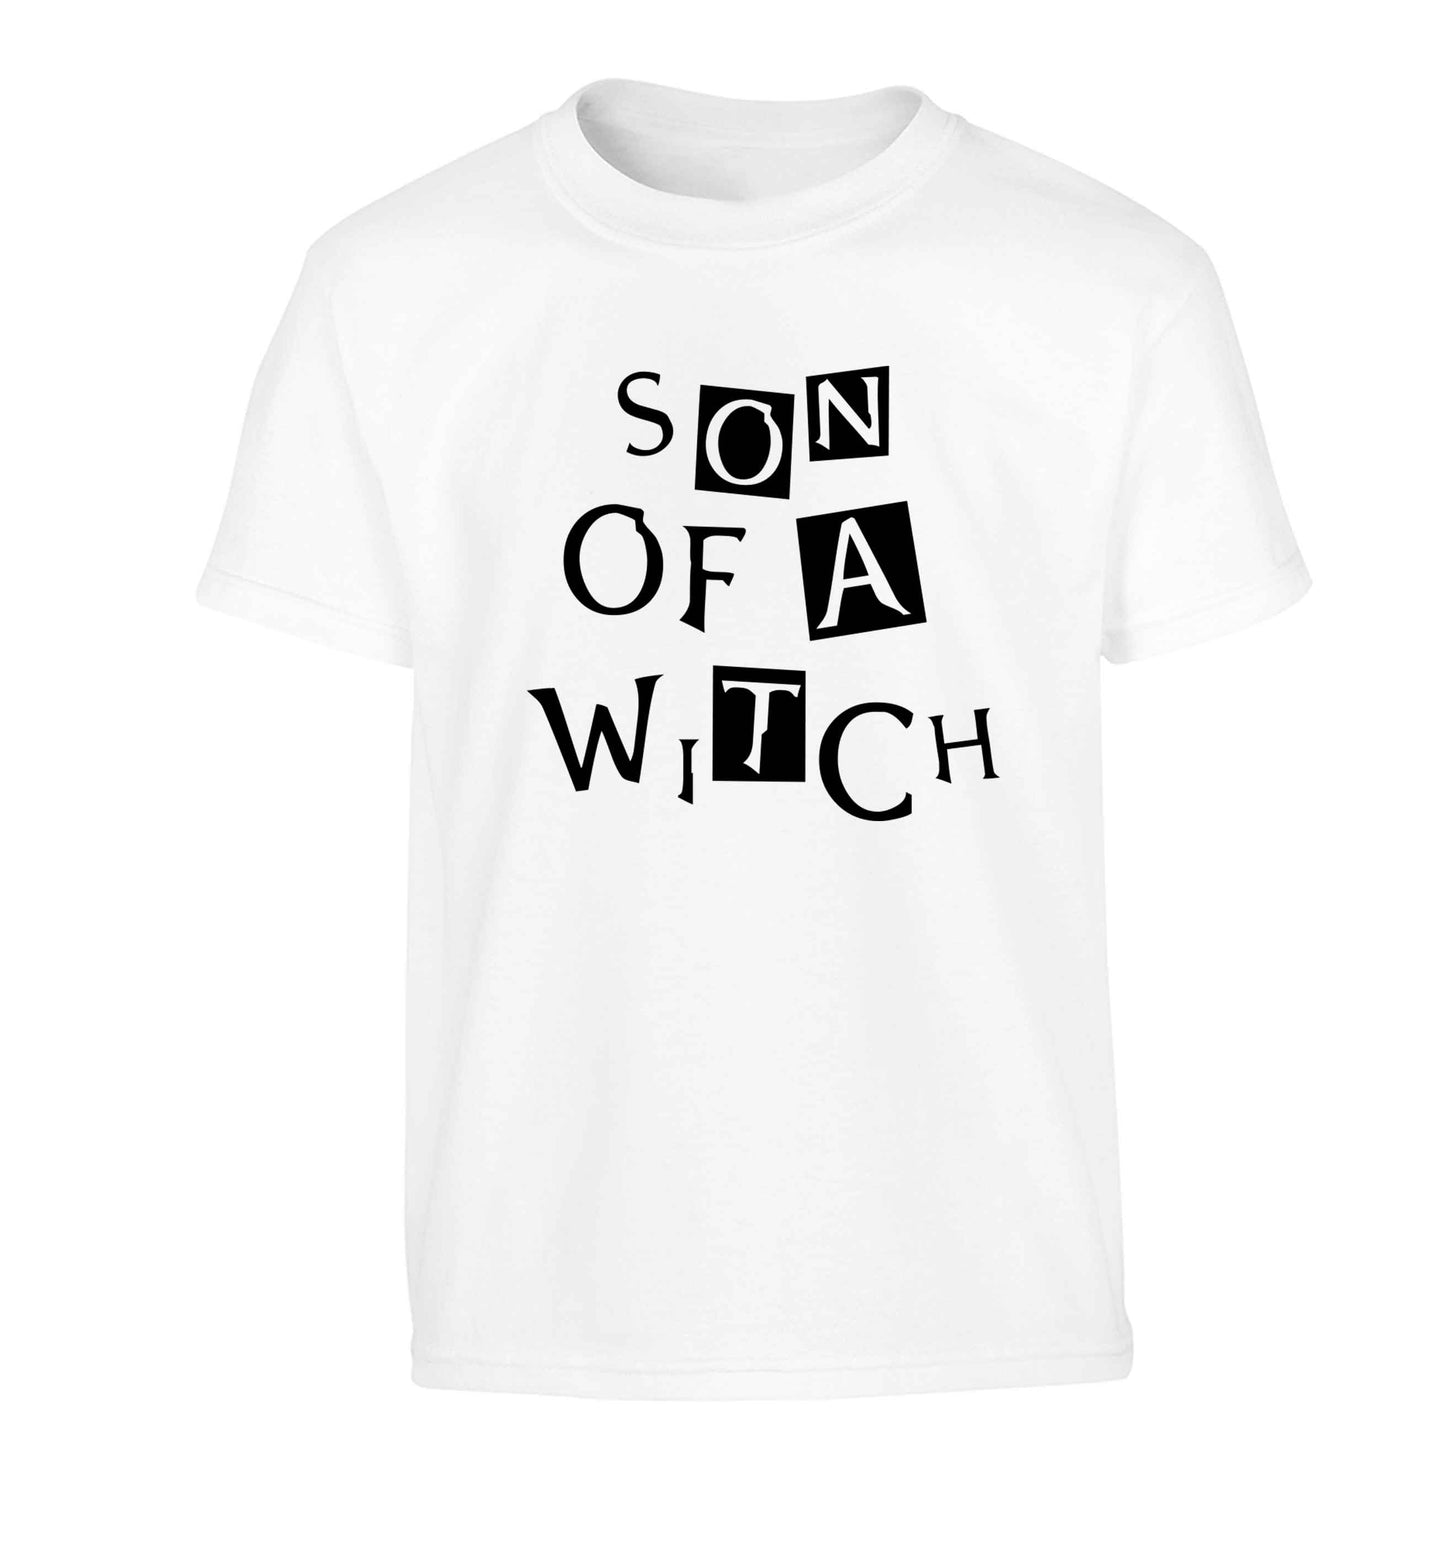 Son of a witch Children's white Tshirt 12-13 Years